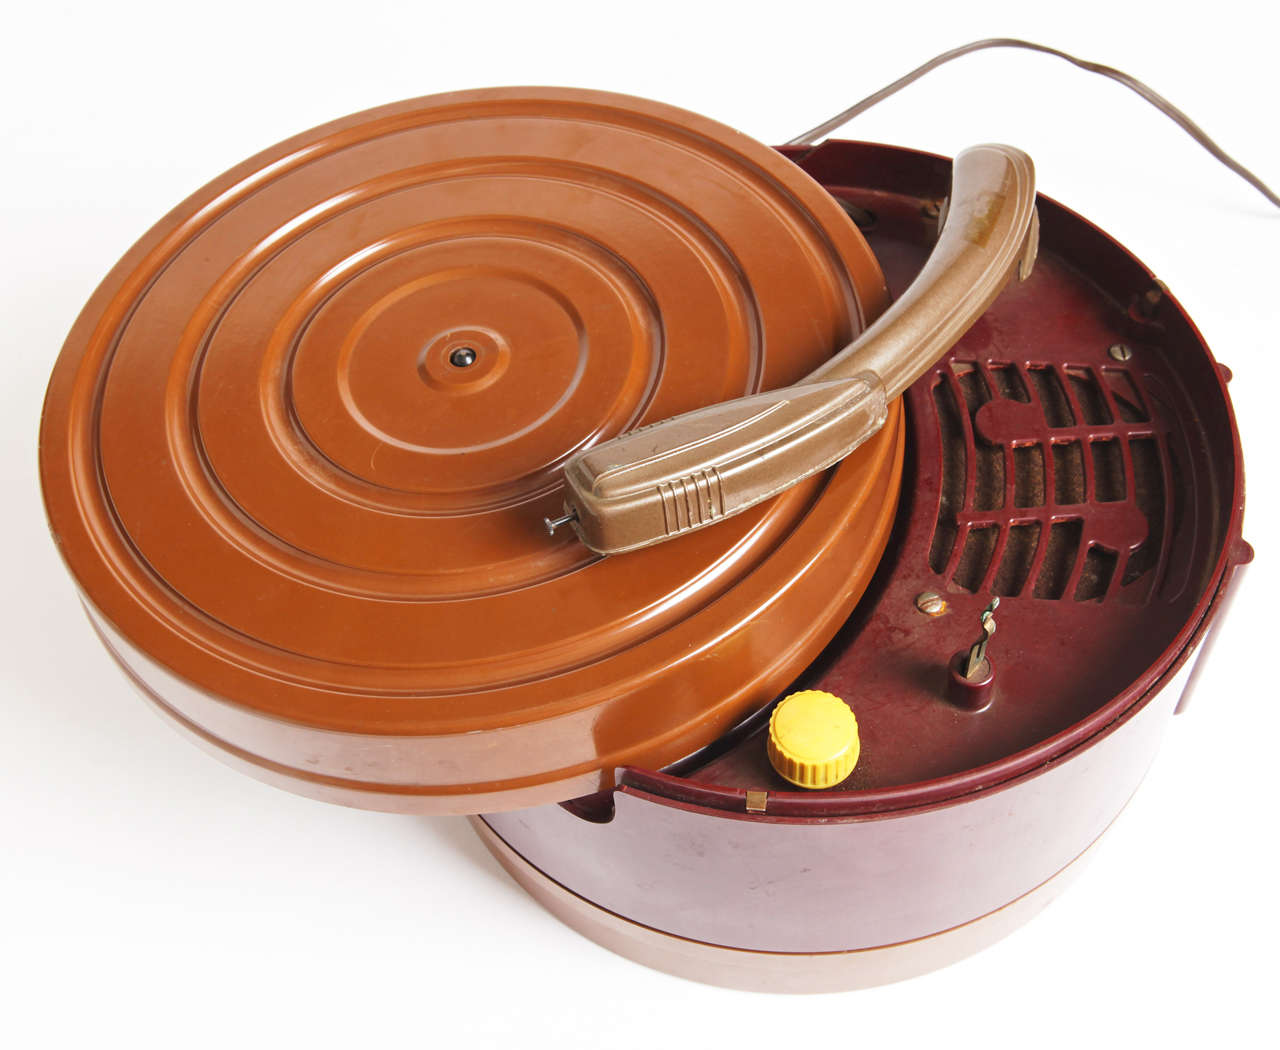 Enameled Mid-Century Catalin Bakelite Self-Contained Portable Record Player With Storage For Sale